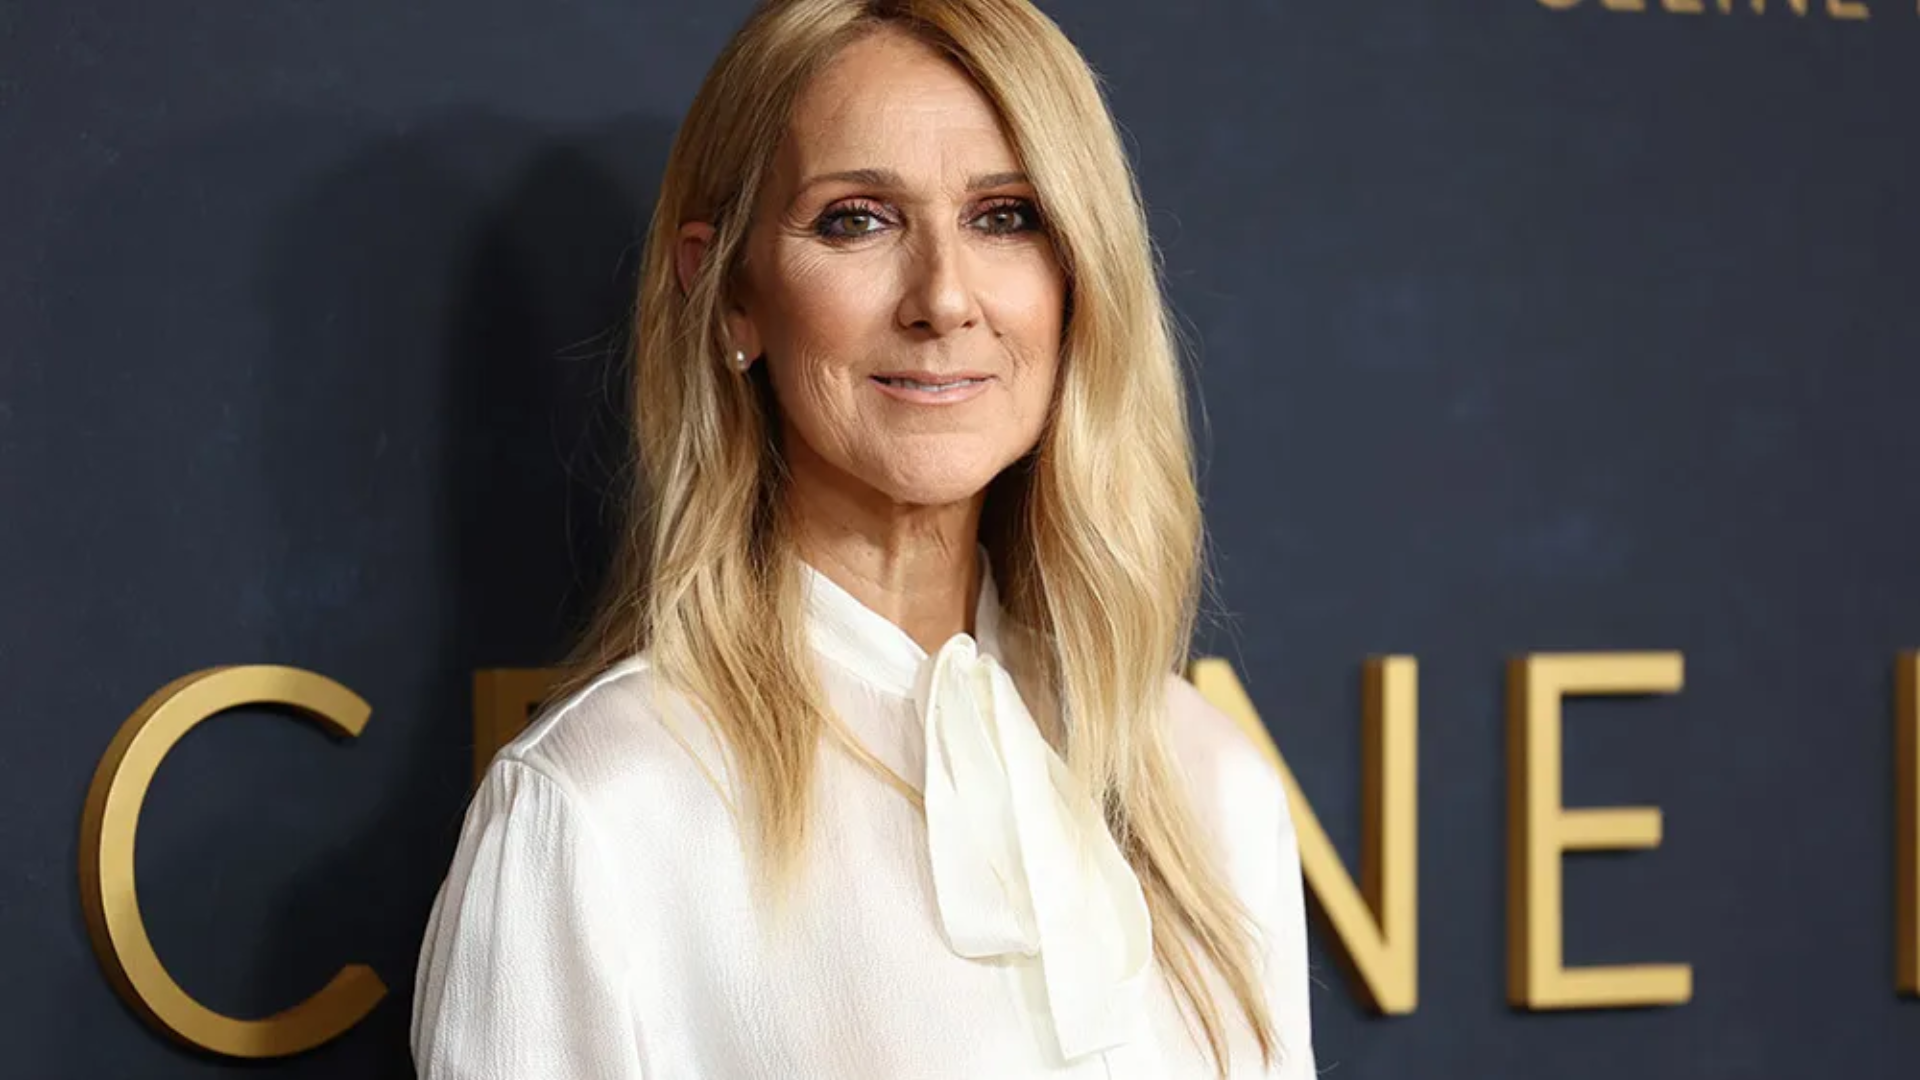 Celine Dion to Perform at 2024 Paris Olympics Opening Ceremony Without Pay